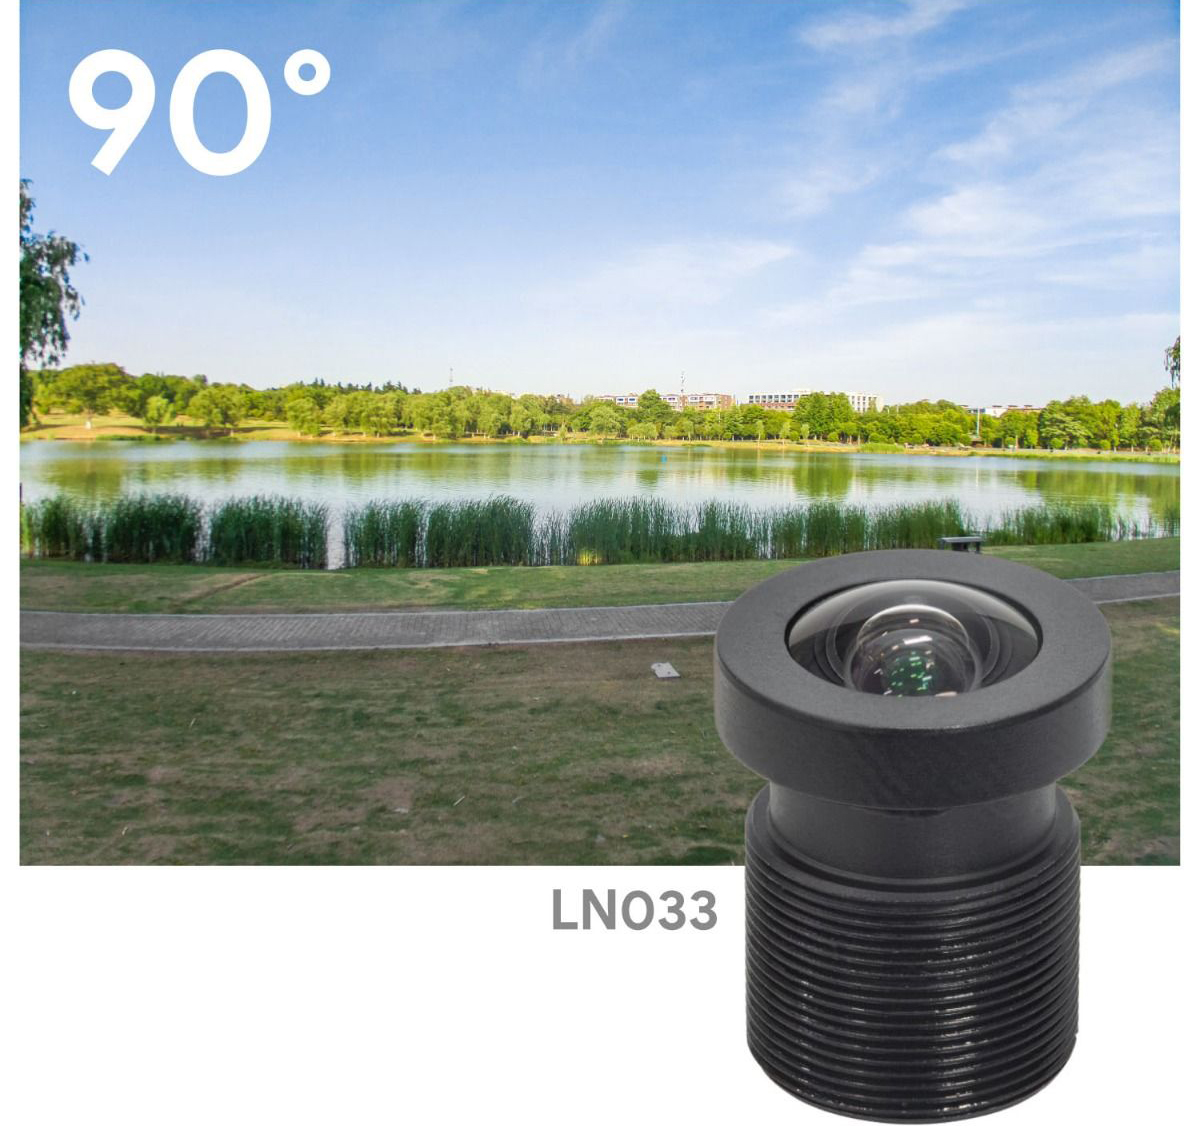 Arducam 90° Wide Angle 1/2.3" M12 Lens w/ Lens Adapter for Raspberry Pi - Clic k to Enlarge